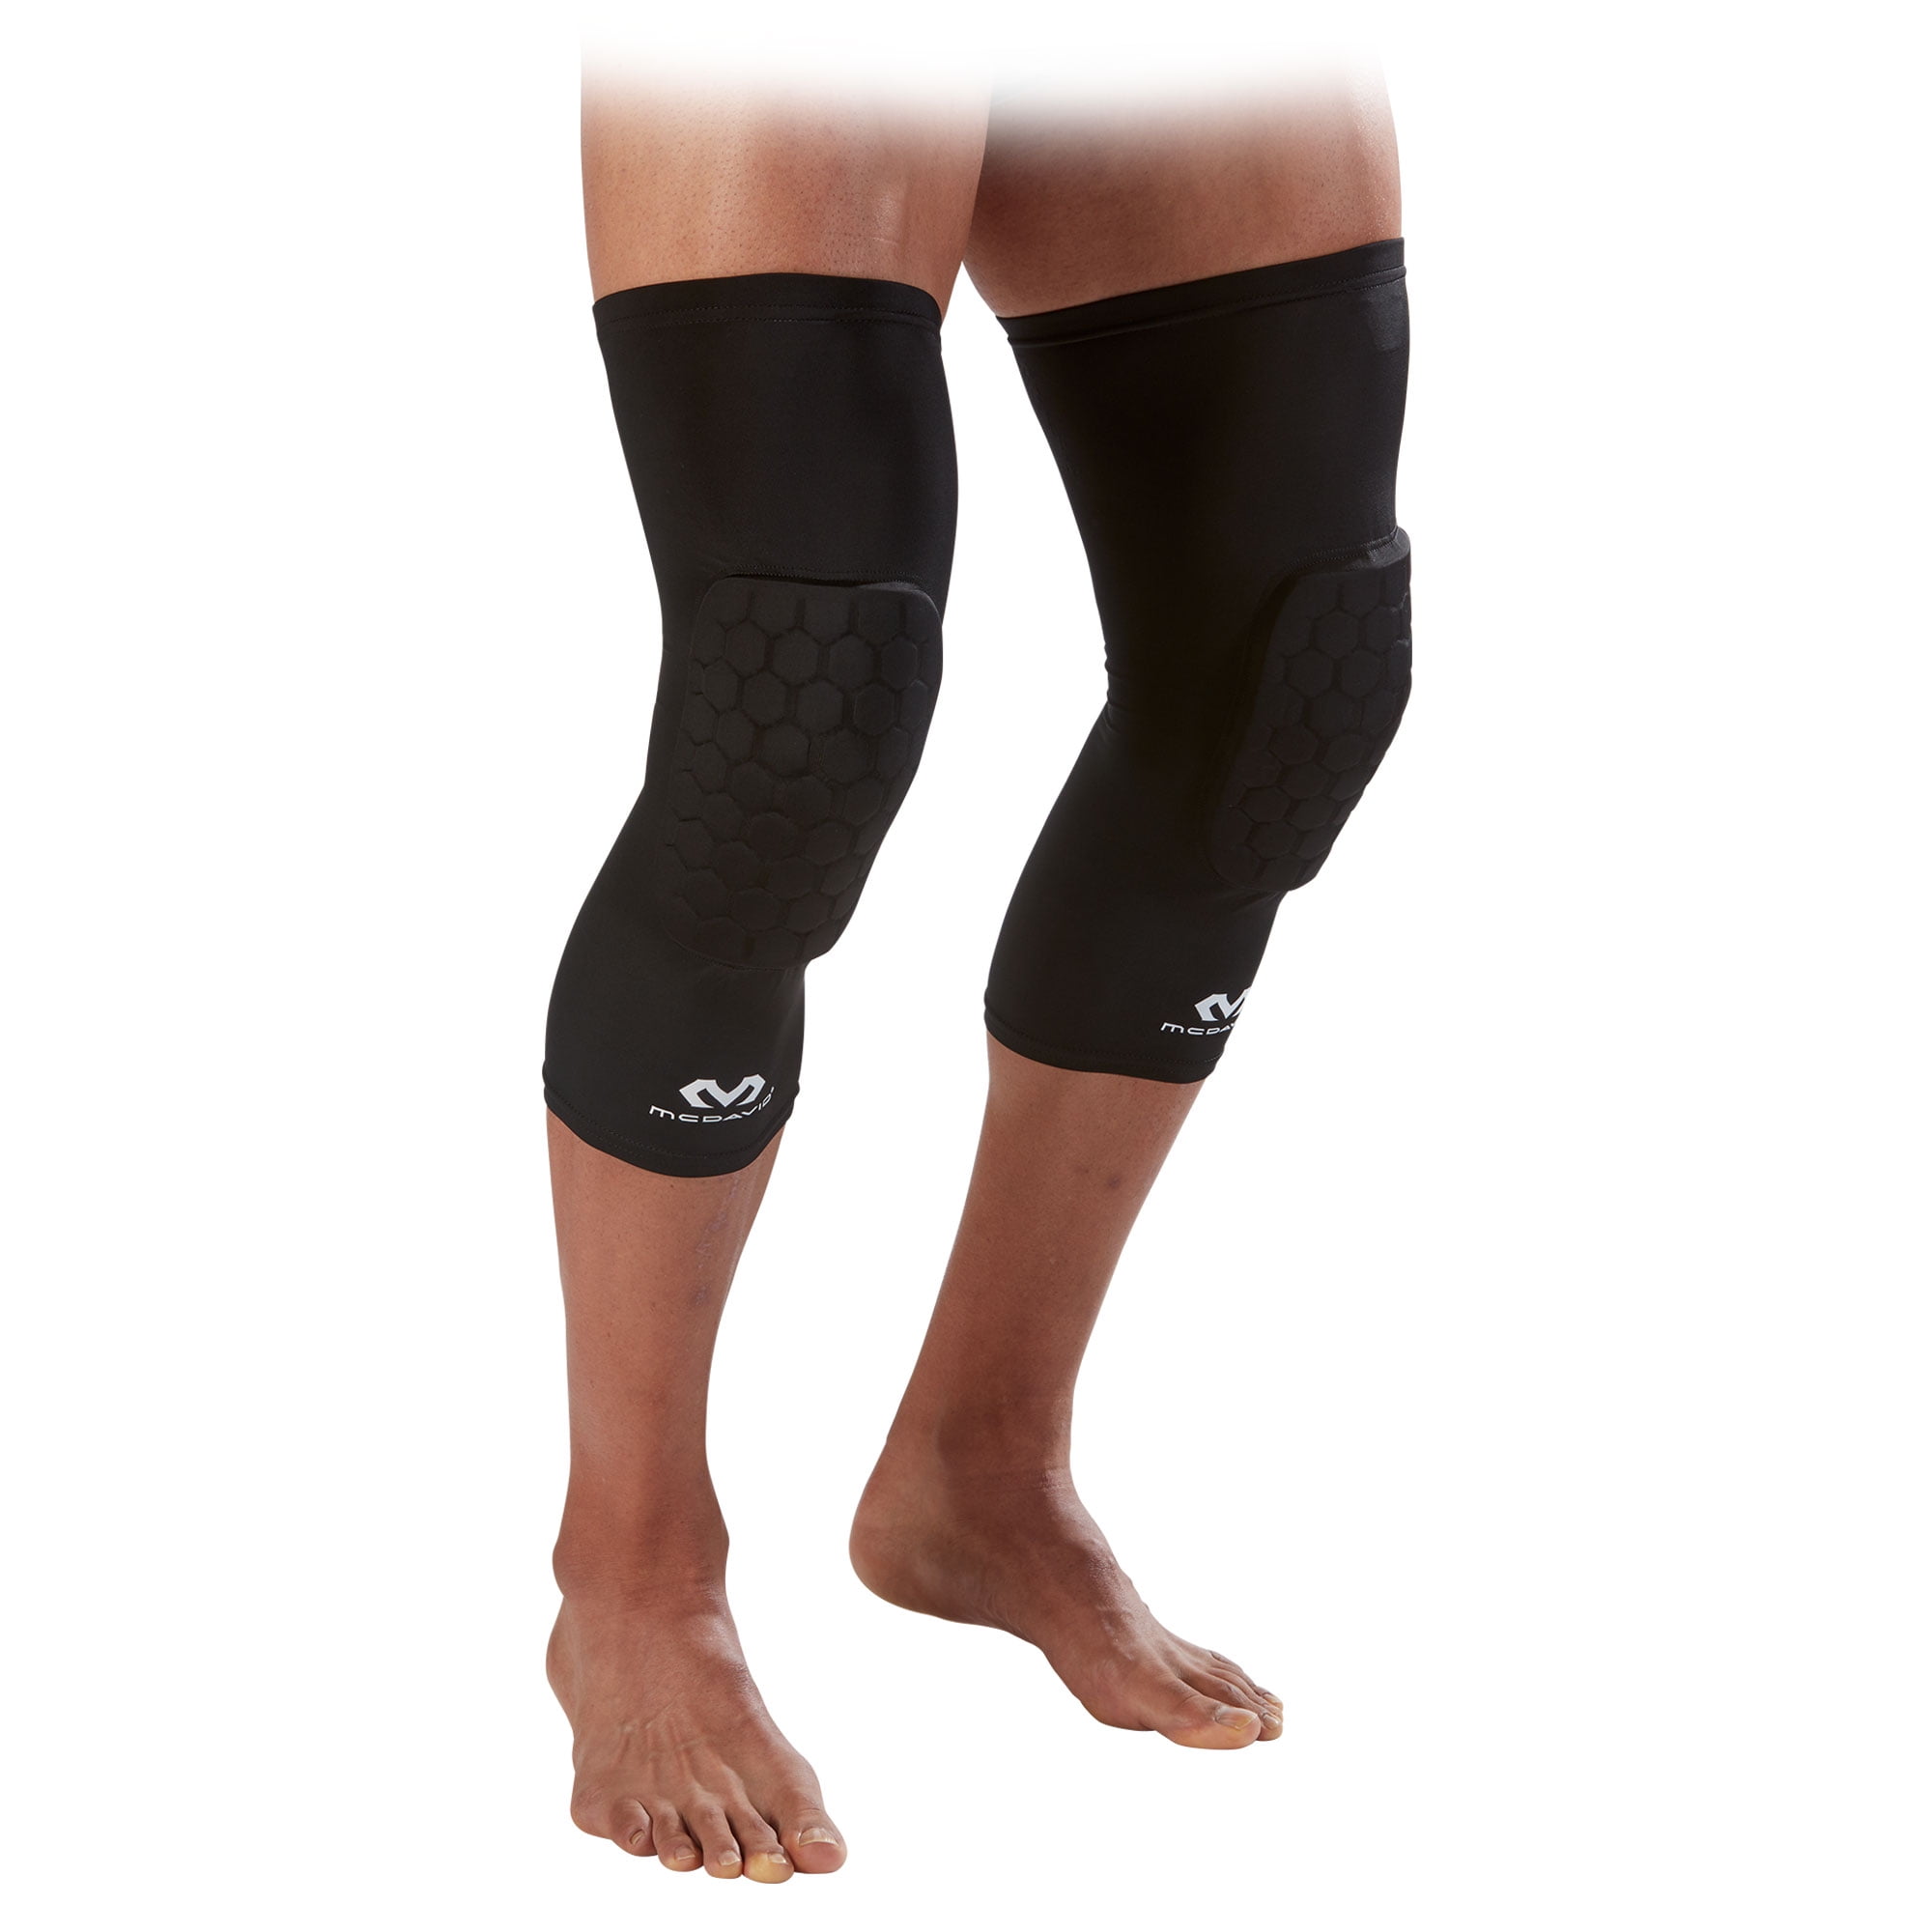 McDavid 6446 Hex Knee Pads Compression Leg Sleeve 1pair Black Small for sale online 